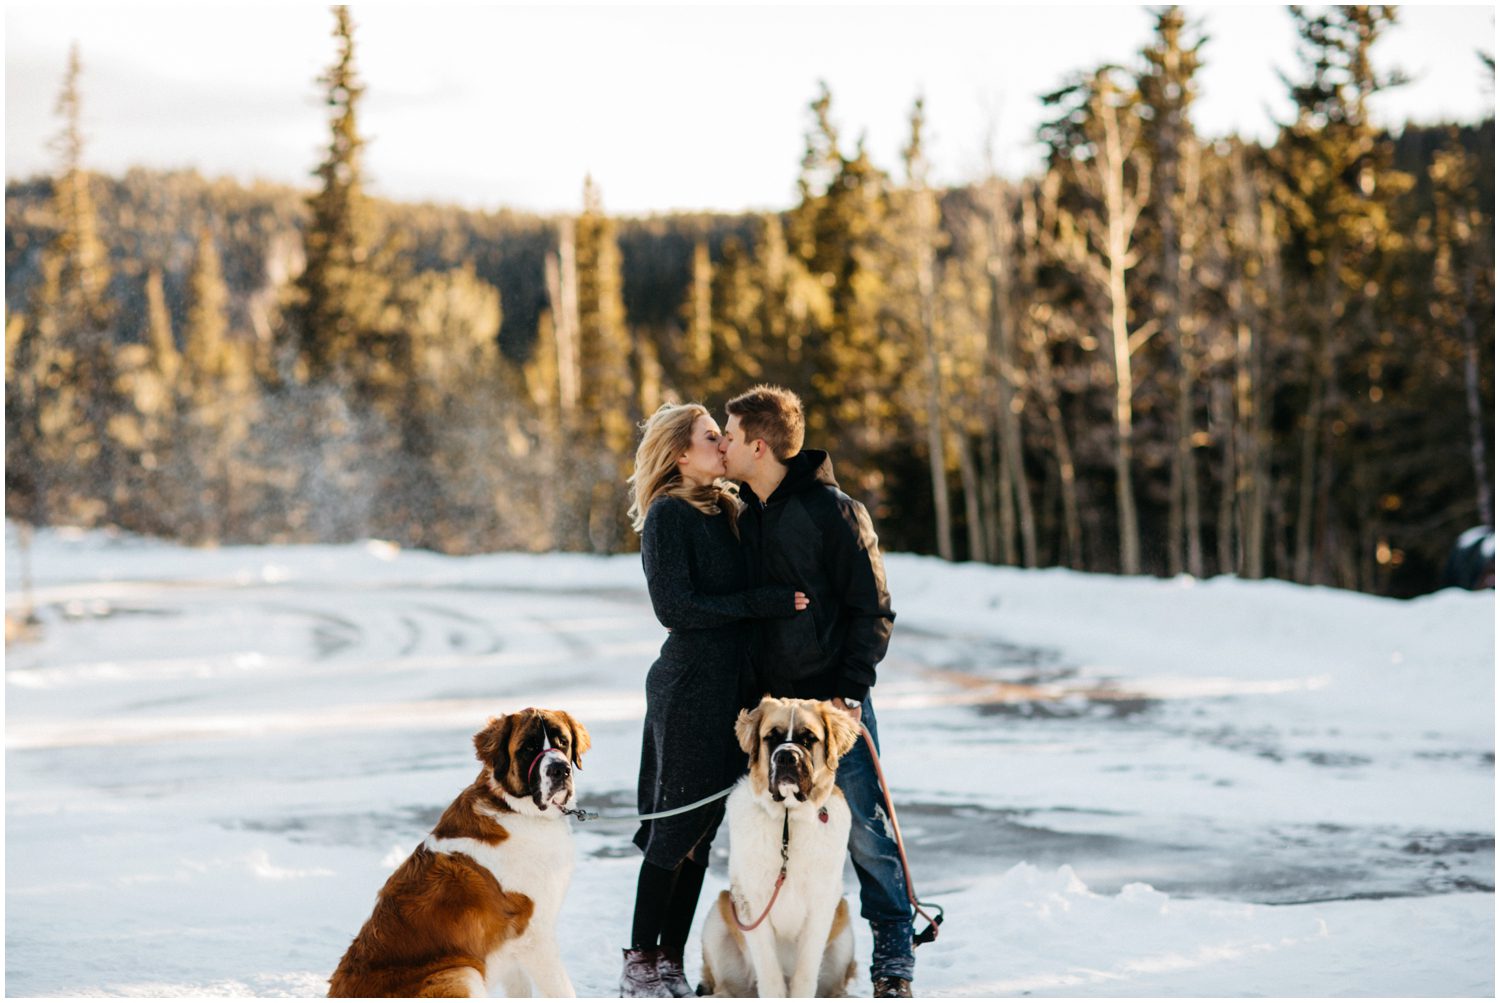 Engagement Session at Brainard Lake in Boulder Colorado  Boulder Colorado engagement photos, Boulder Colorado Photographer, Boulder Wedding Photographer, Boulder engagement photographer, Boulder engagement photos, Engagement session locations in Boulder, Colorado winter engagement session, Winter engagement photos, Mountain engagement session, Snowy engagement photos, Engagement photos with dogs, Save the date, Save the data photo ideas, Photo session with dogs, St Bernard, Brainard Lake, Colorado, Boulder Colorado, Nederland Colorado, Ward Colorado, Colorado wedding, Colorado photographer